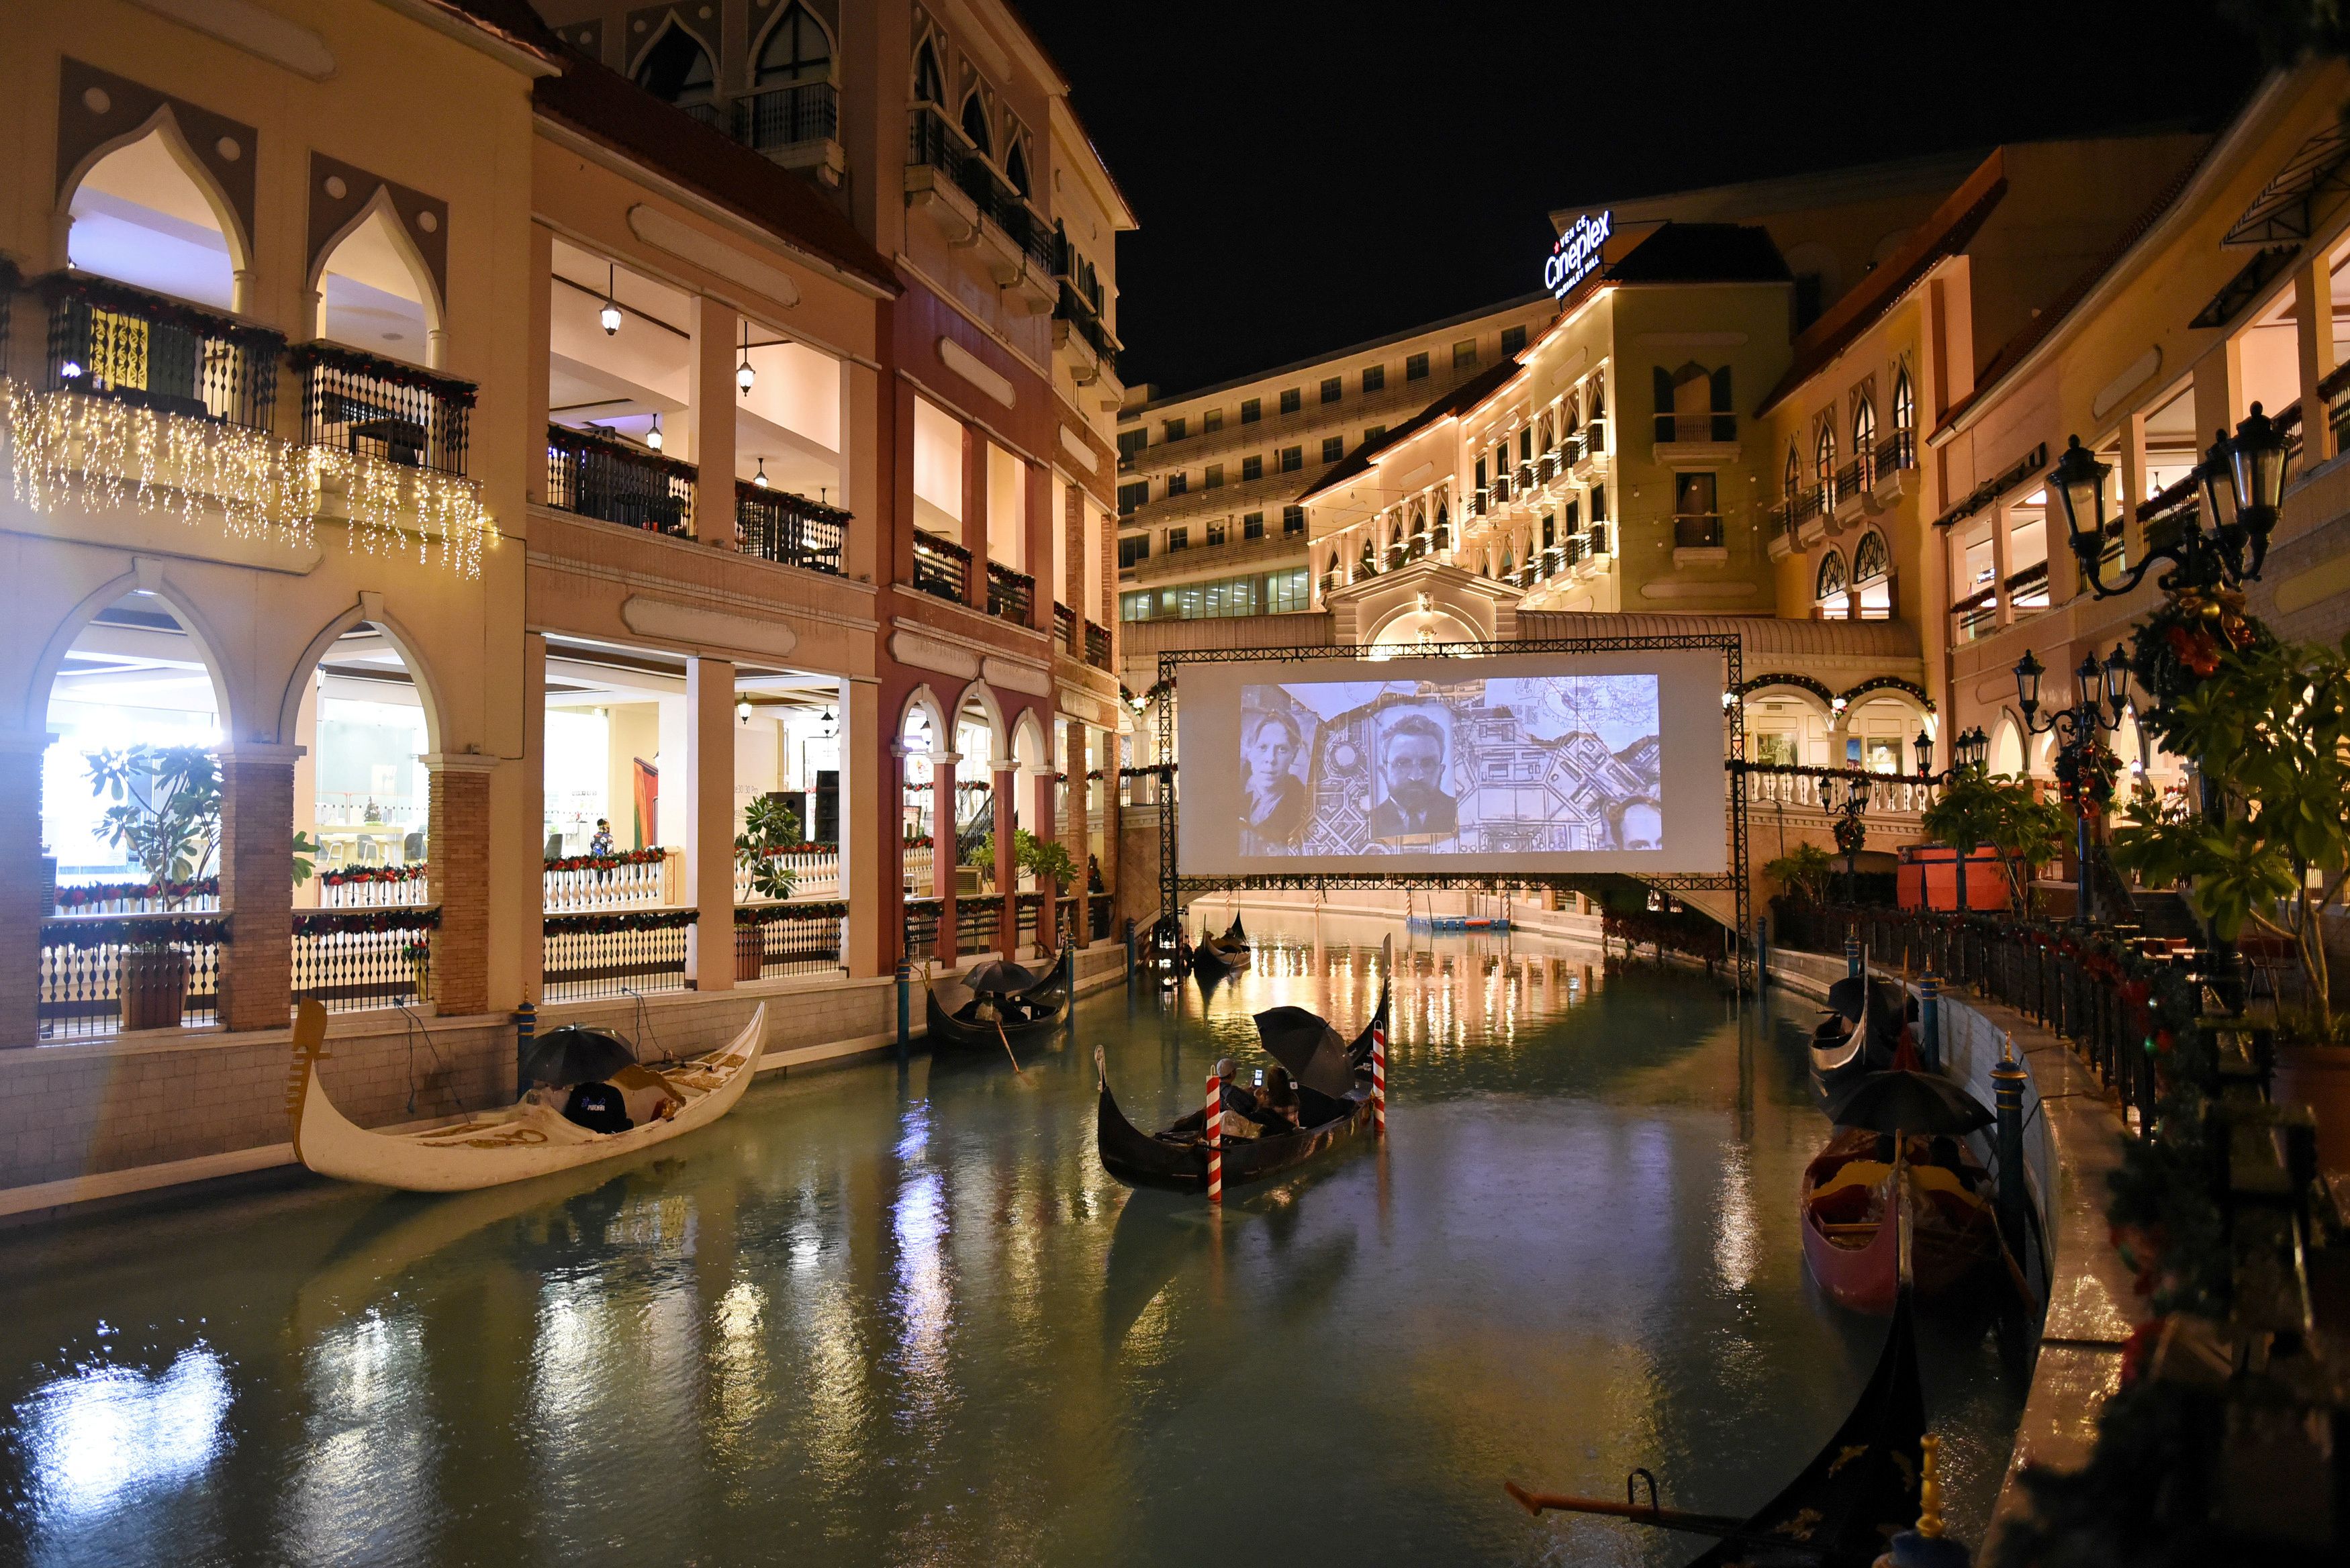 People on gondolas watch a movie while observing social distancing amid coronavirus disease (COVID-19) at a float-in cinema, in Venice Grand Canal Mall, Taguig City, Metro Manila